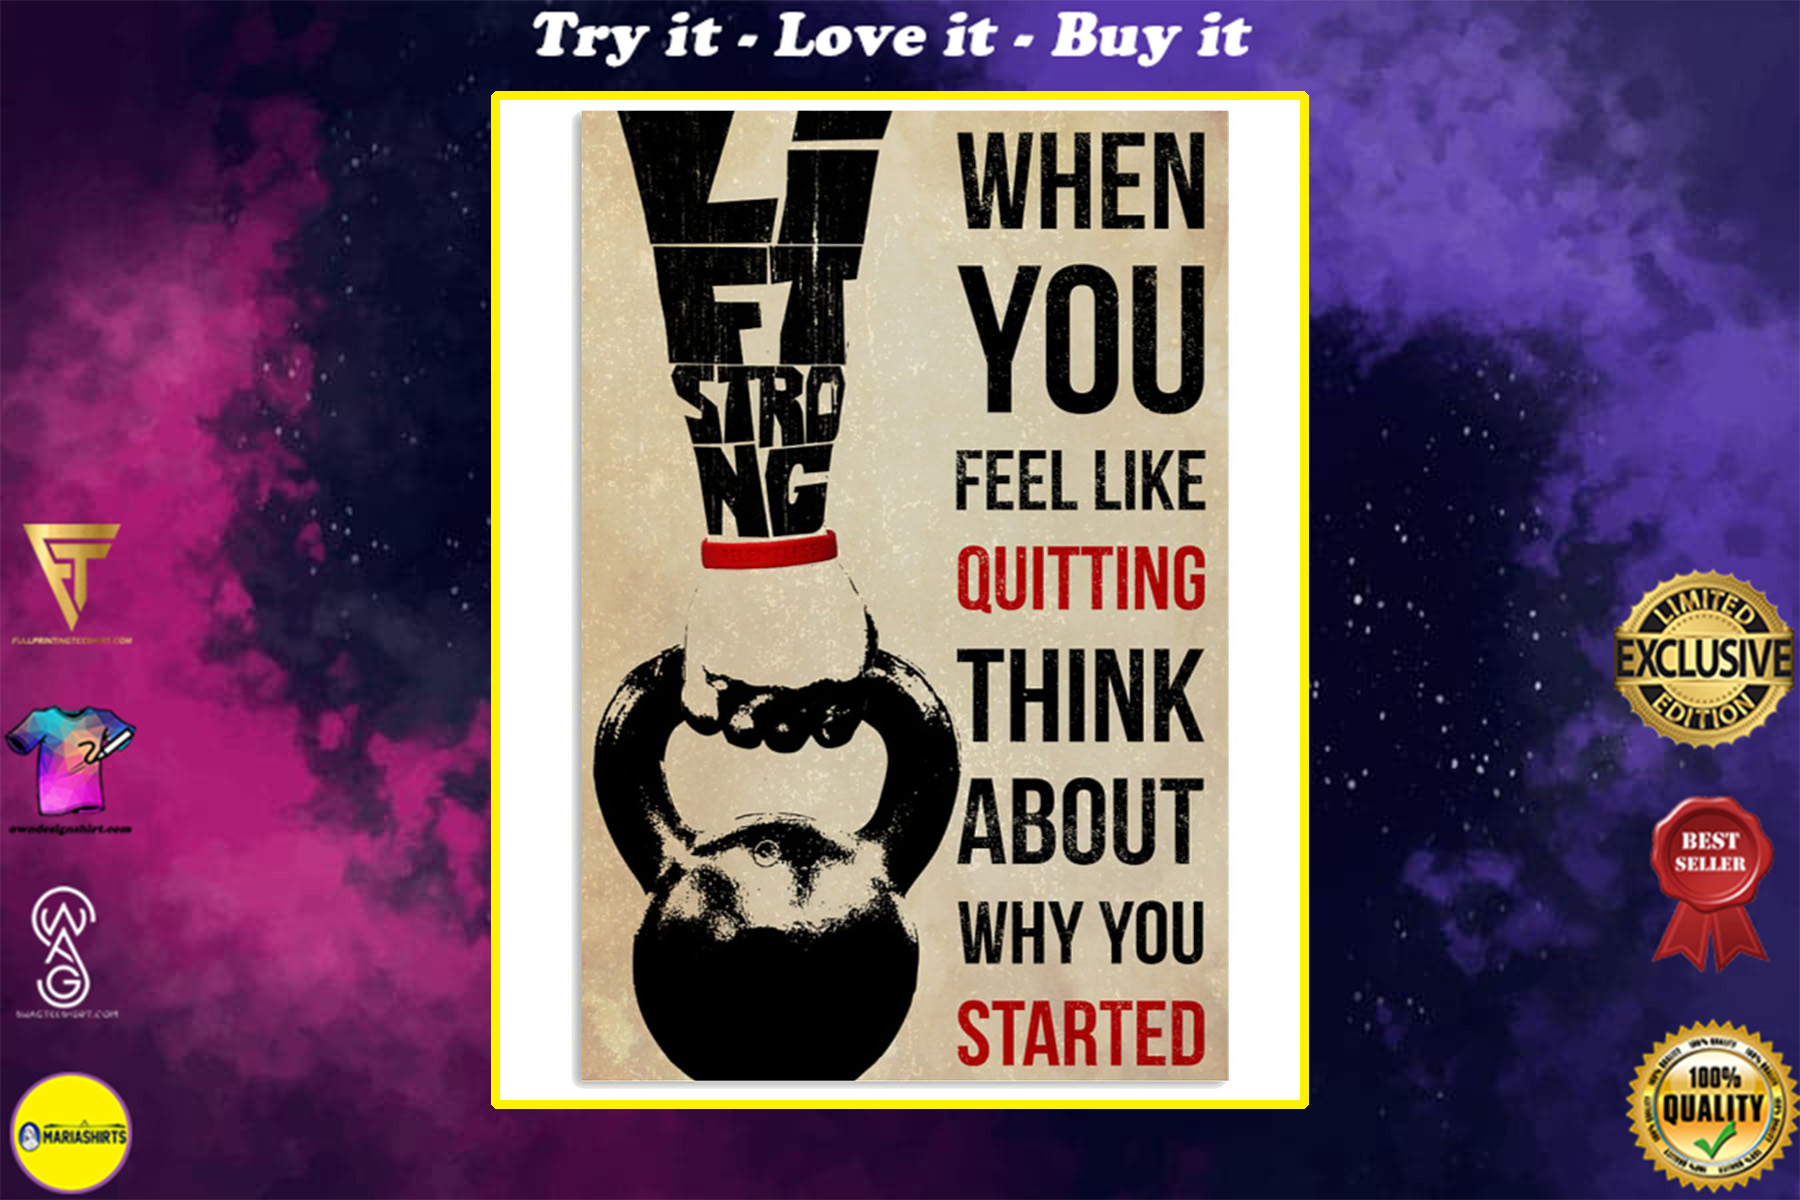 training when you feel like quitting think about why you started poster